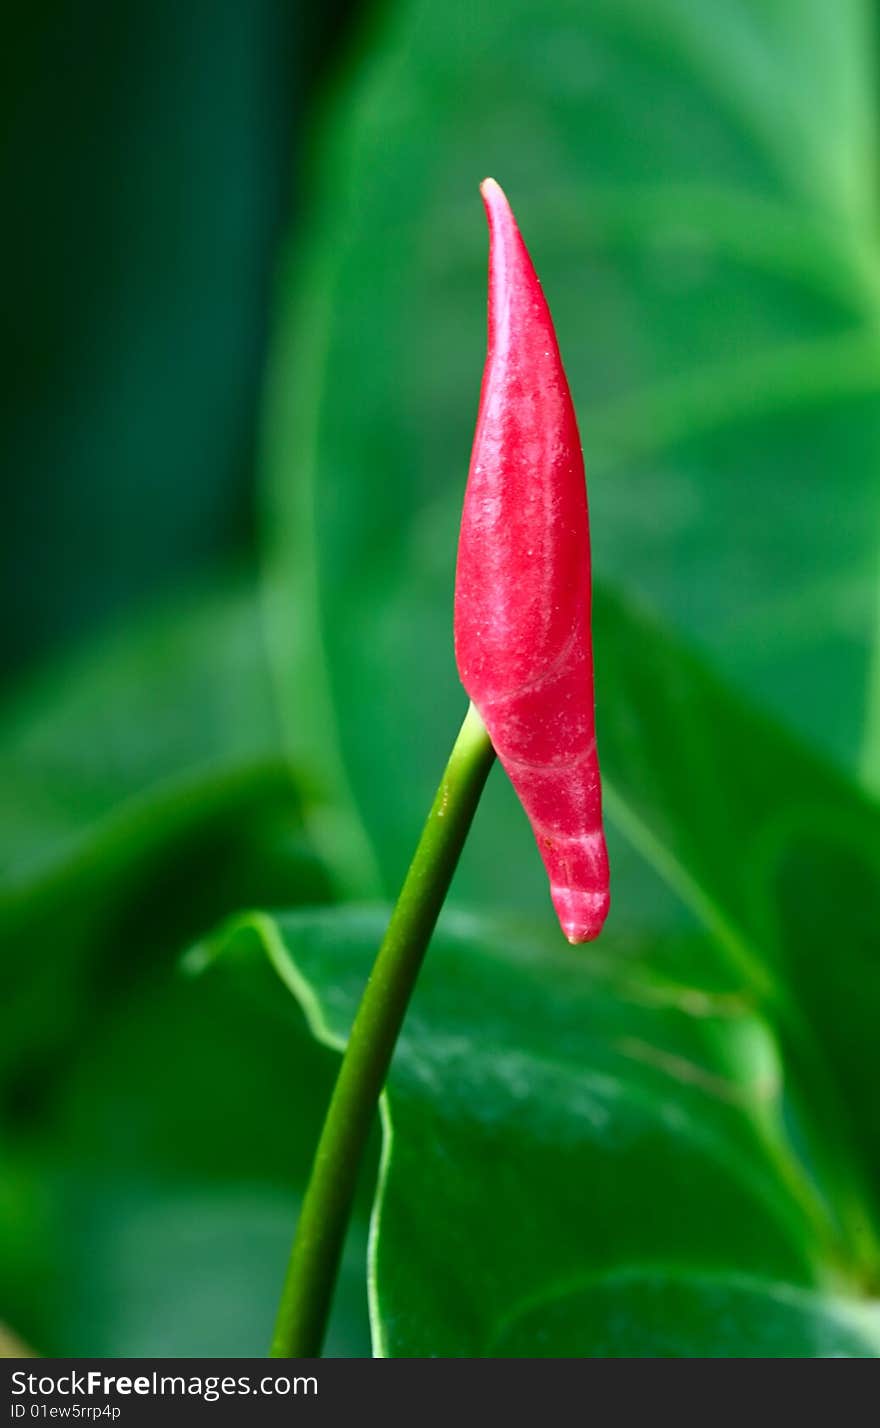 wait for an open of leaf red anthurium.